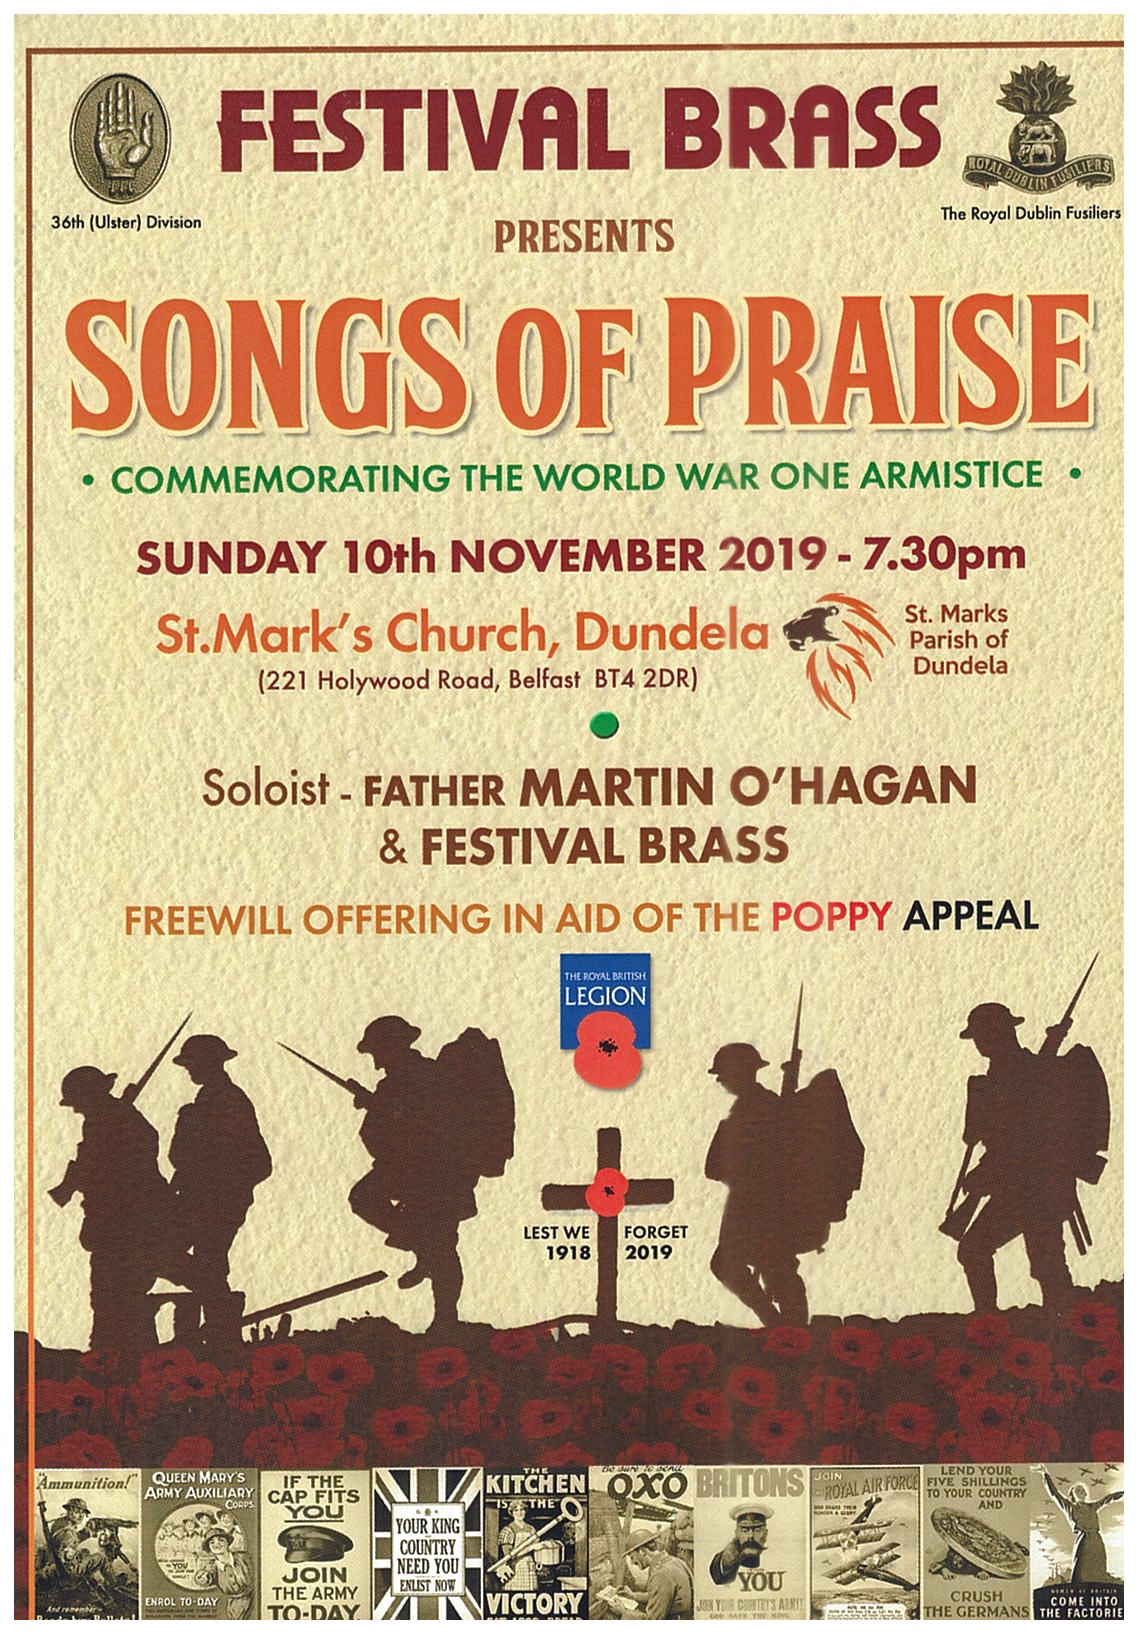 Festival Brass present Songs of Praise to commemorate the World War one armistice in Saont Mark's Dundelas, Belfast on 10th November 2019